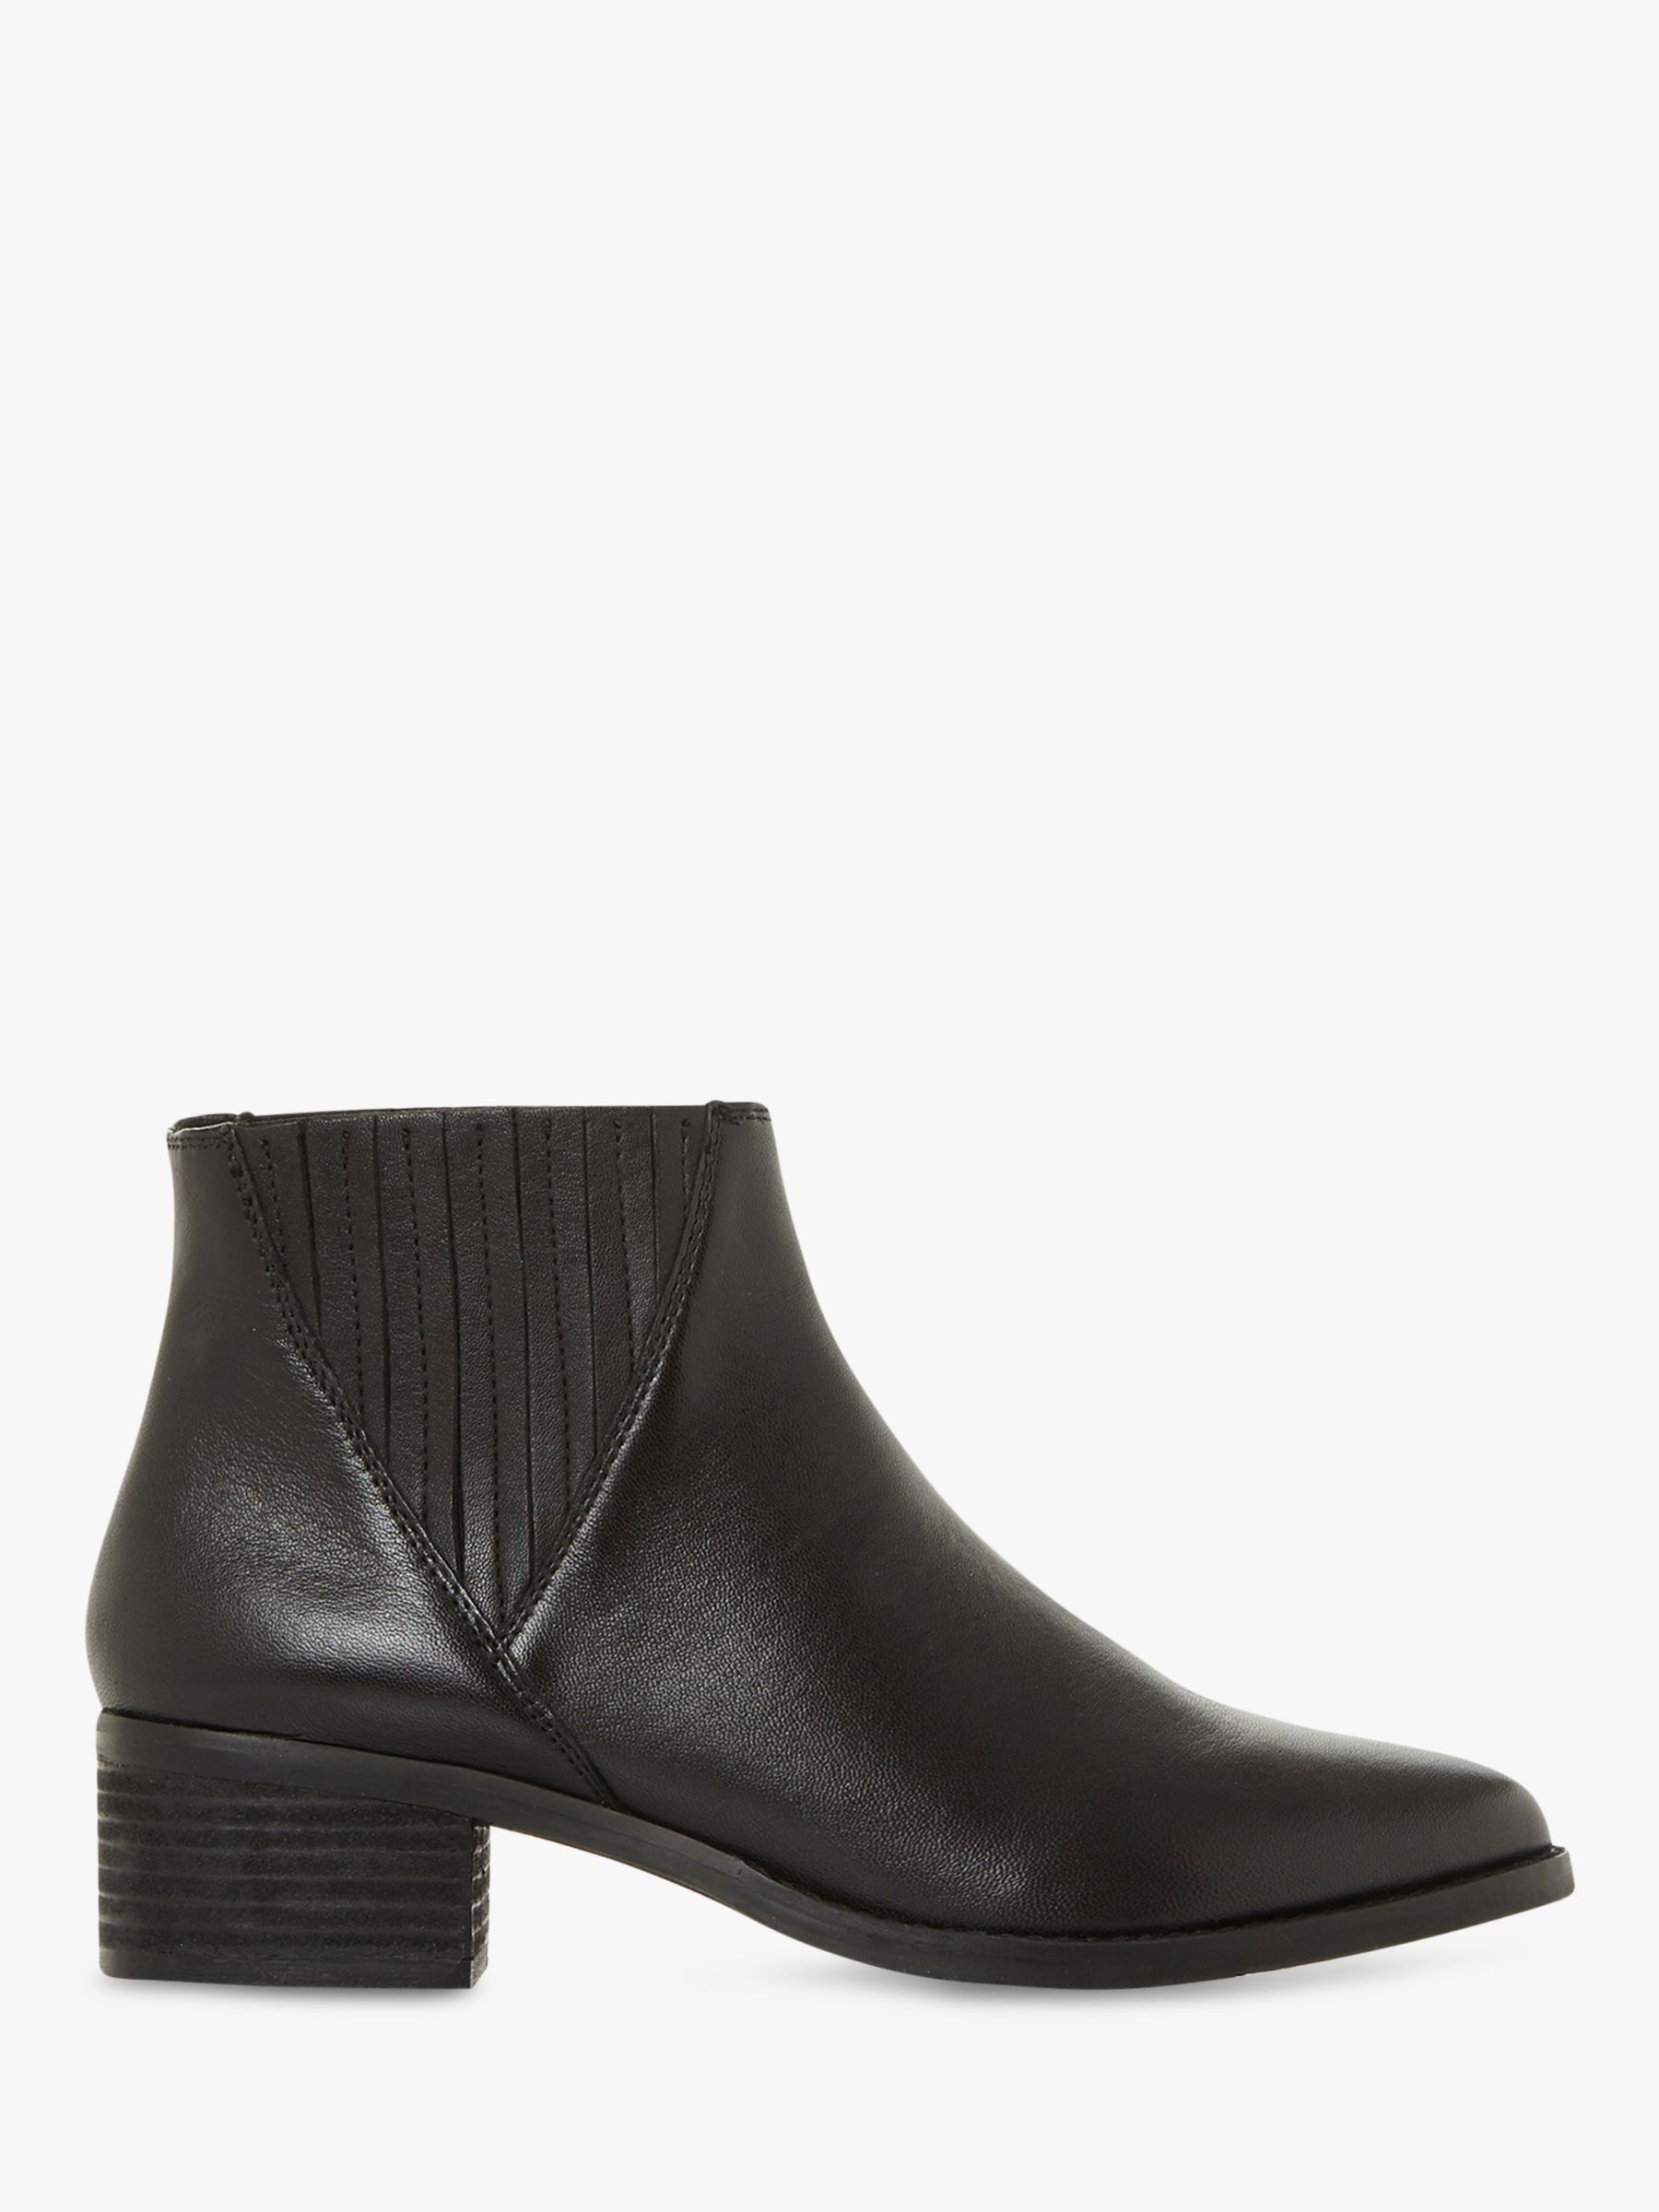 Steve Madden Always Stacked Heel Ankle Boots, Black Leather